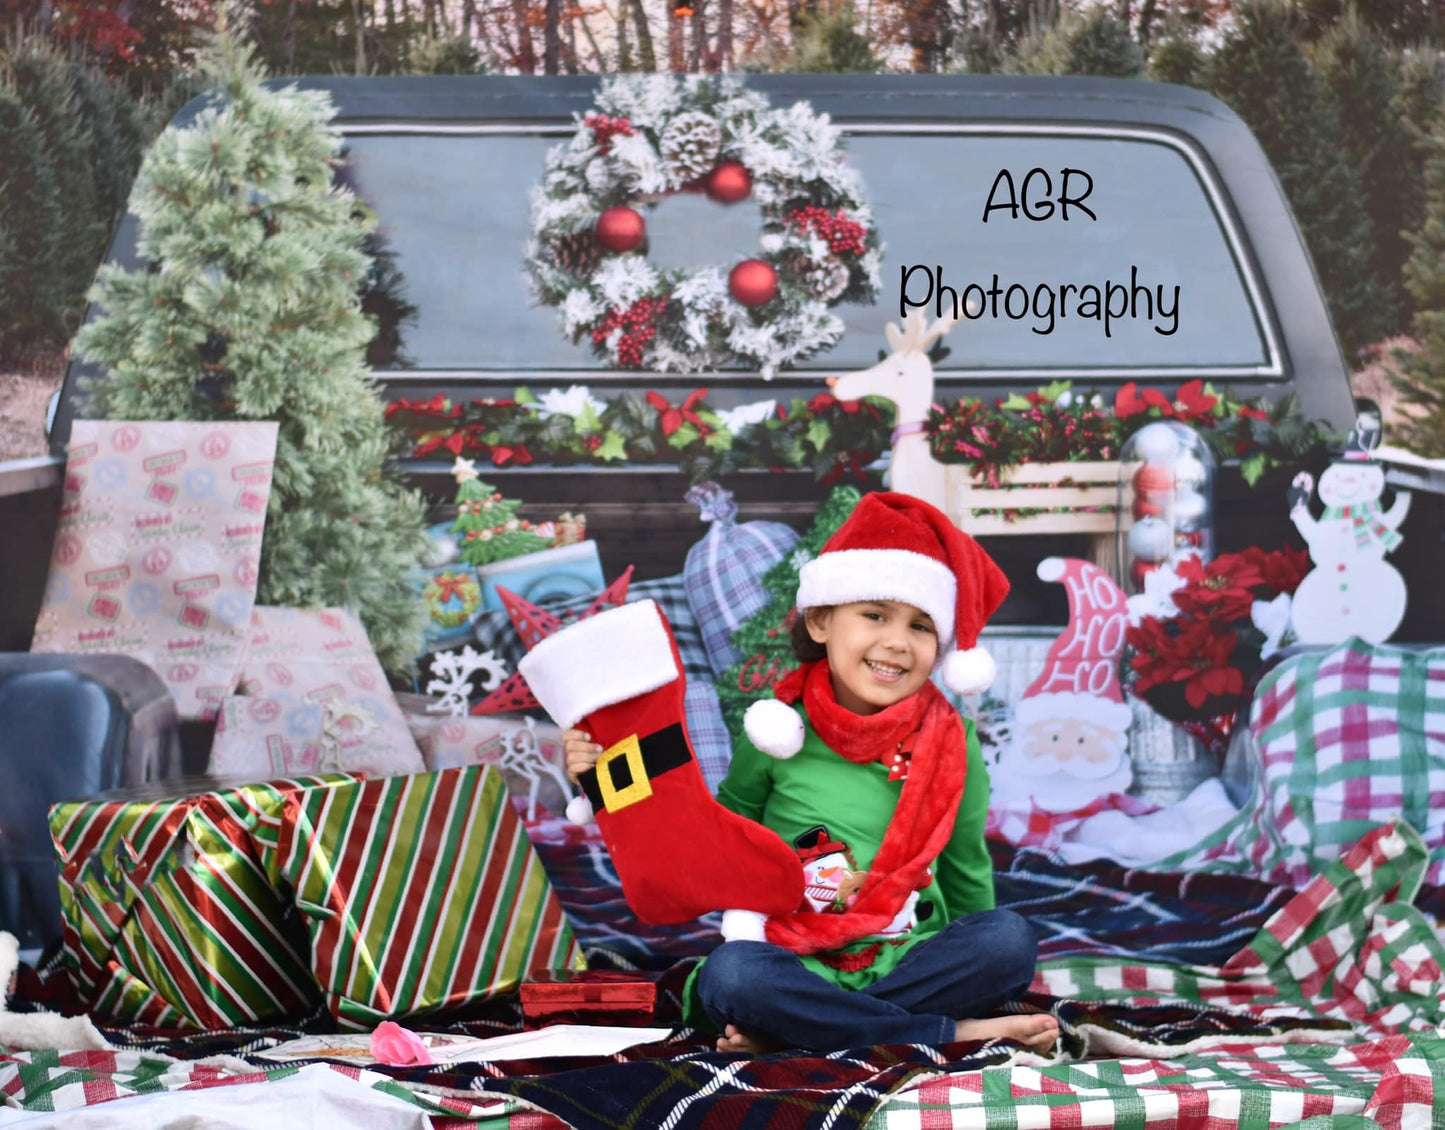 Merry Christmas Mini Session Photography Backdrop for AGR Photography